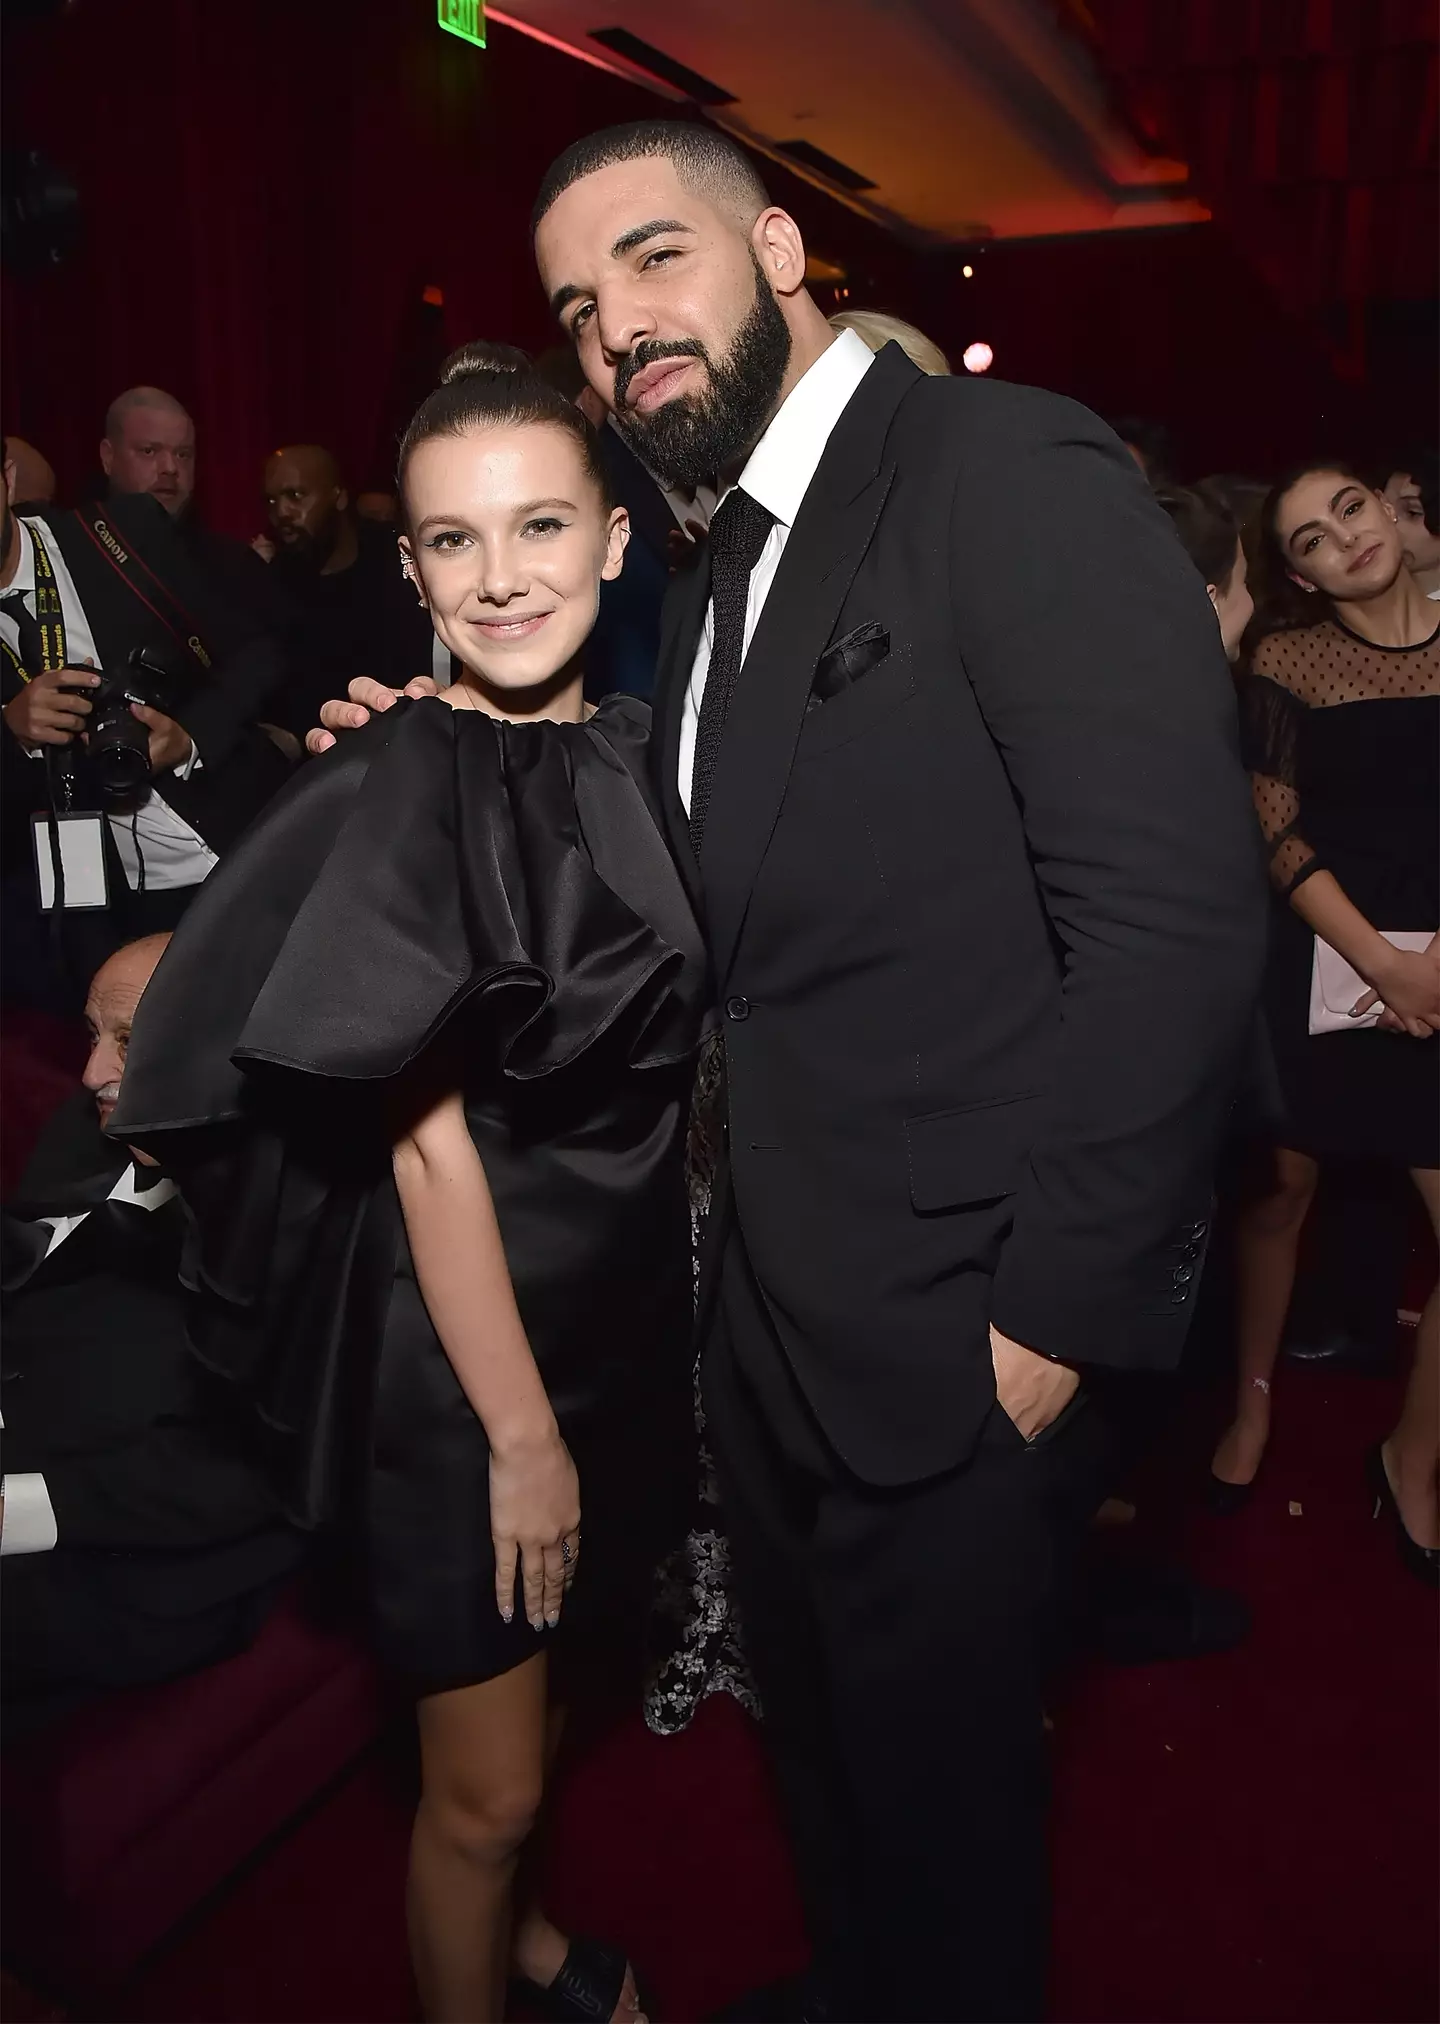 Drake has addressed his controversial friendship with Millie Bobby Brown in his new album.